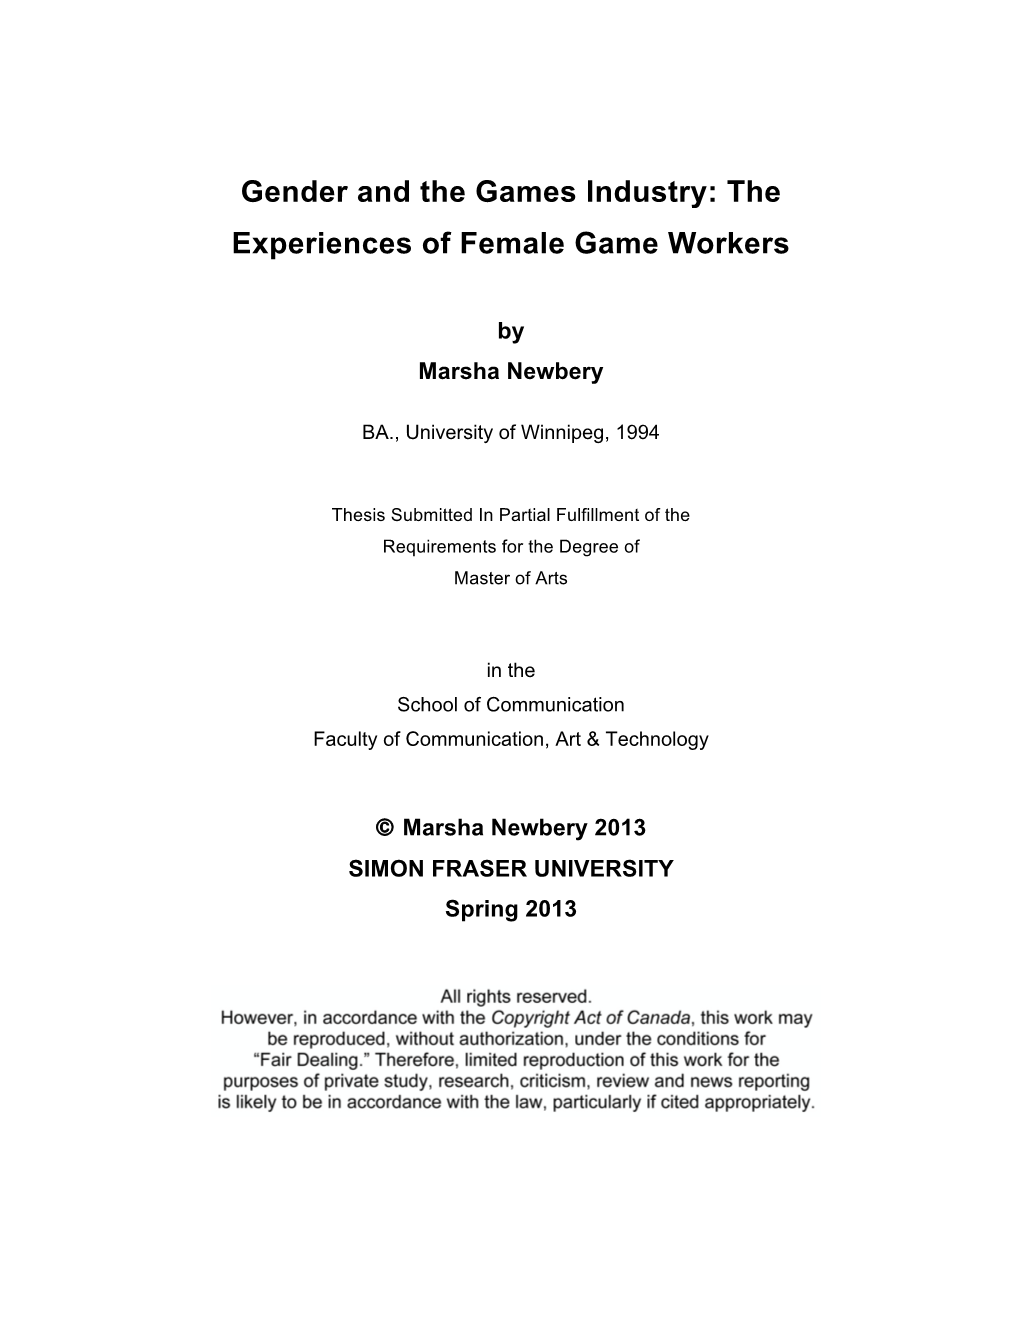 Gender and the Games Industry: the Experiences of Female Game Workers